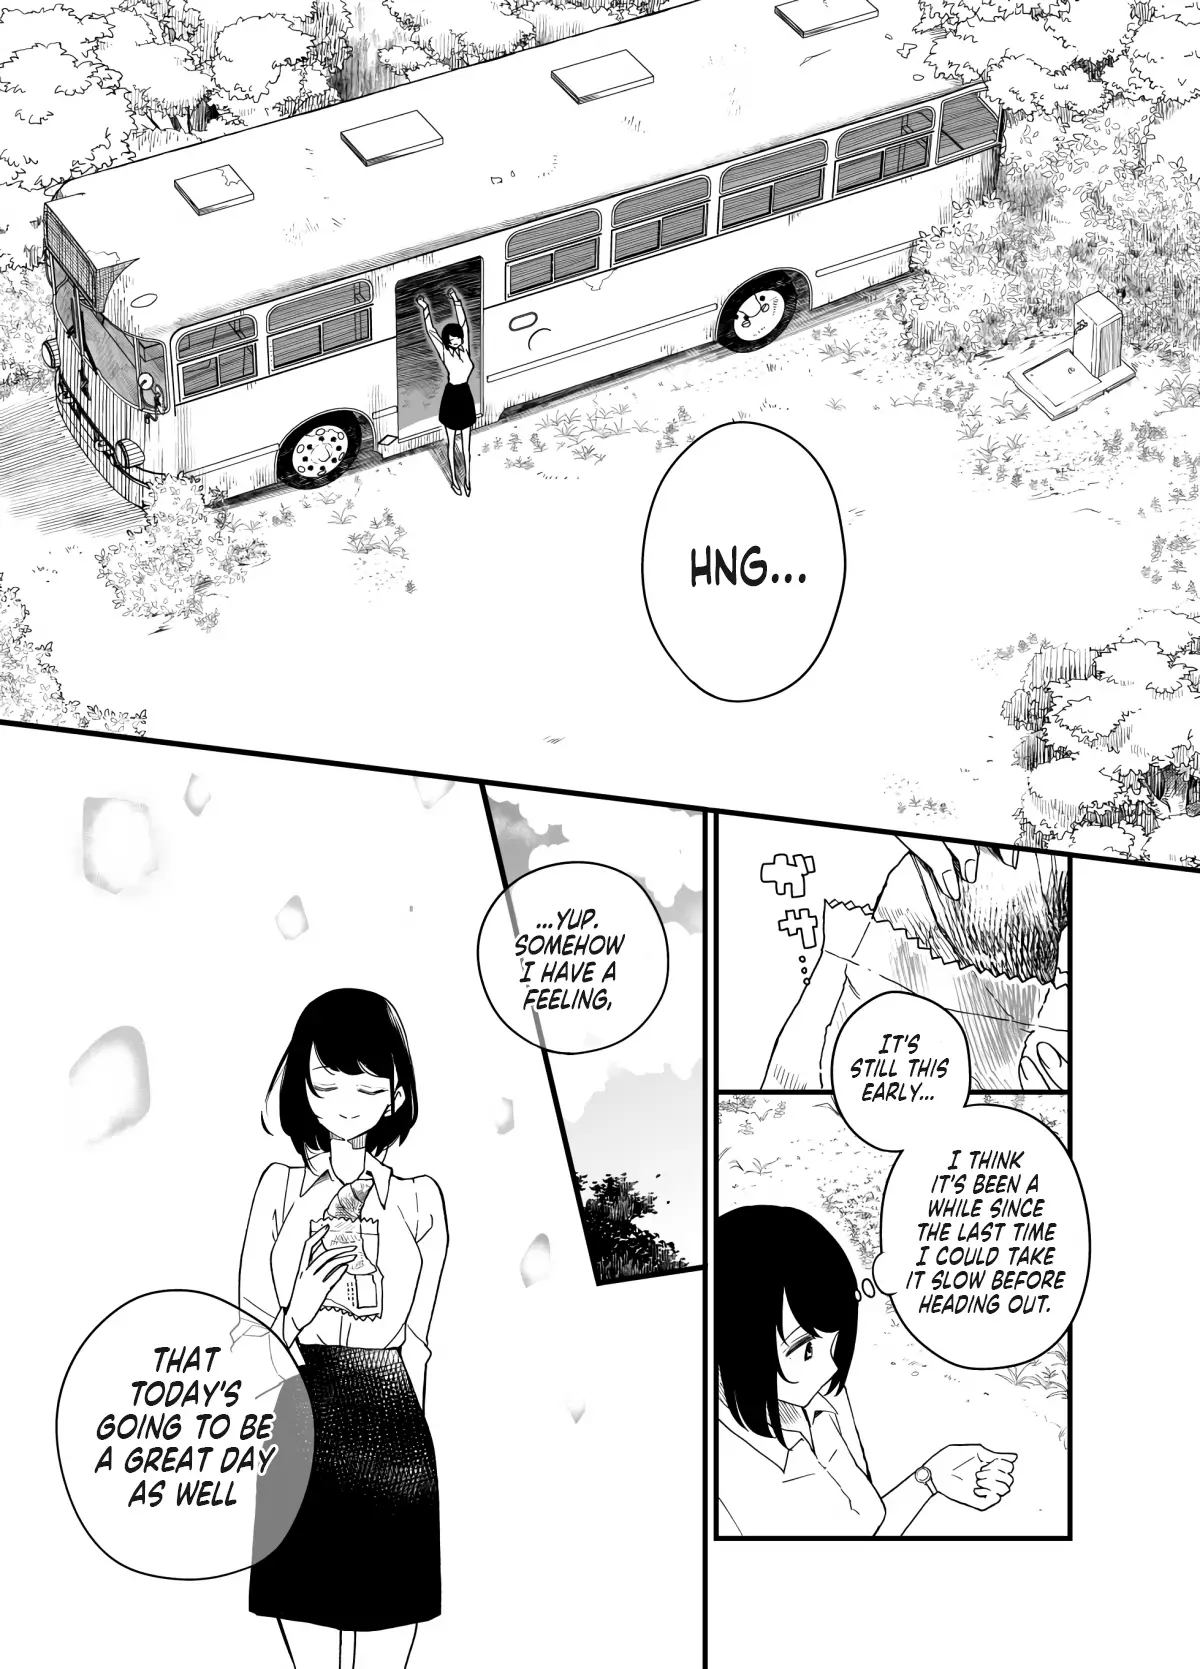 Living In An Abandoned Bus - 1 page 3-e7fc9f0c